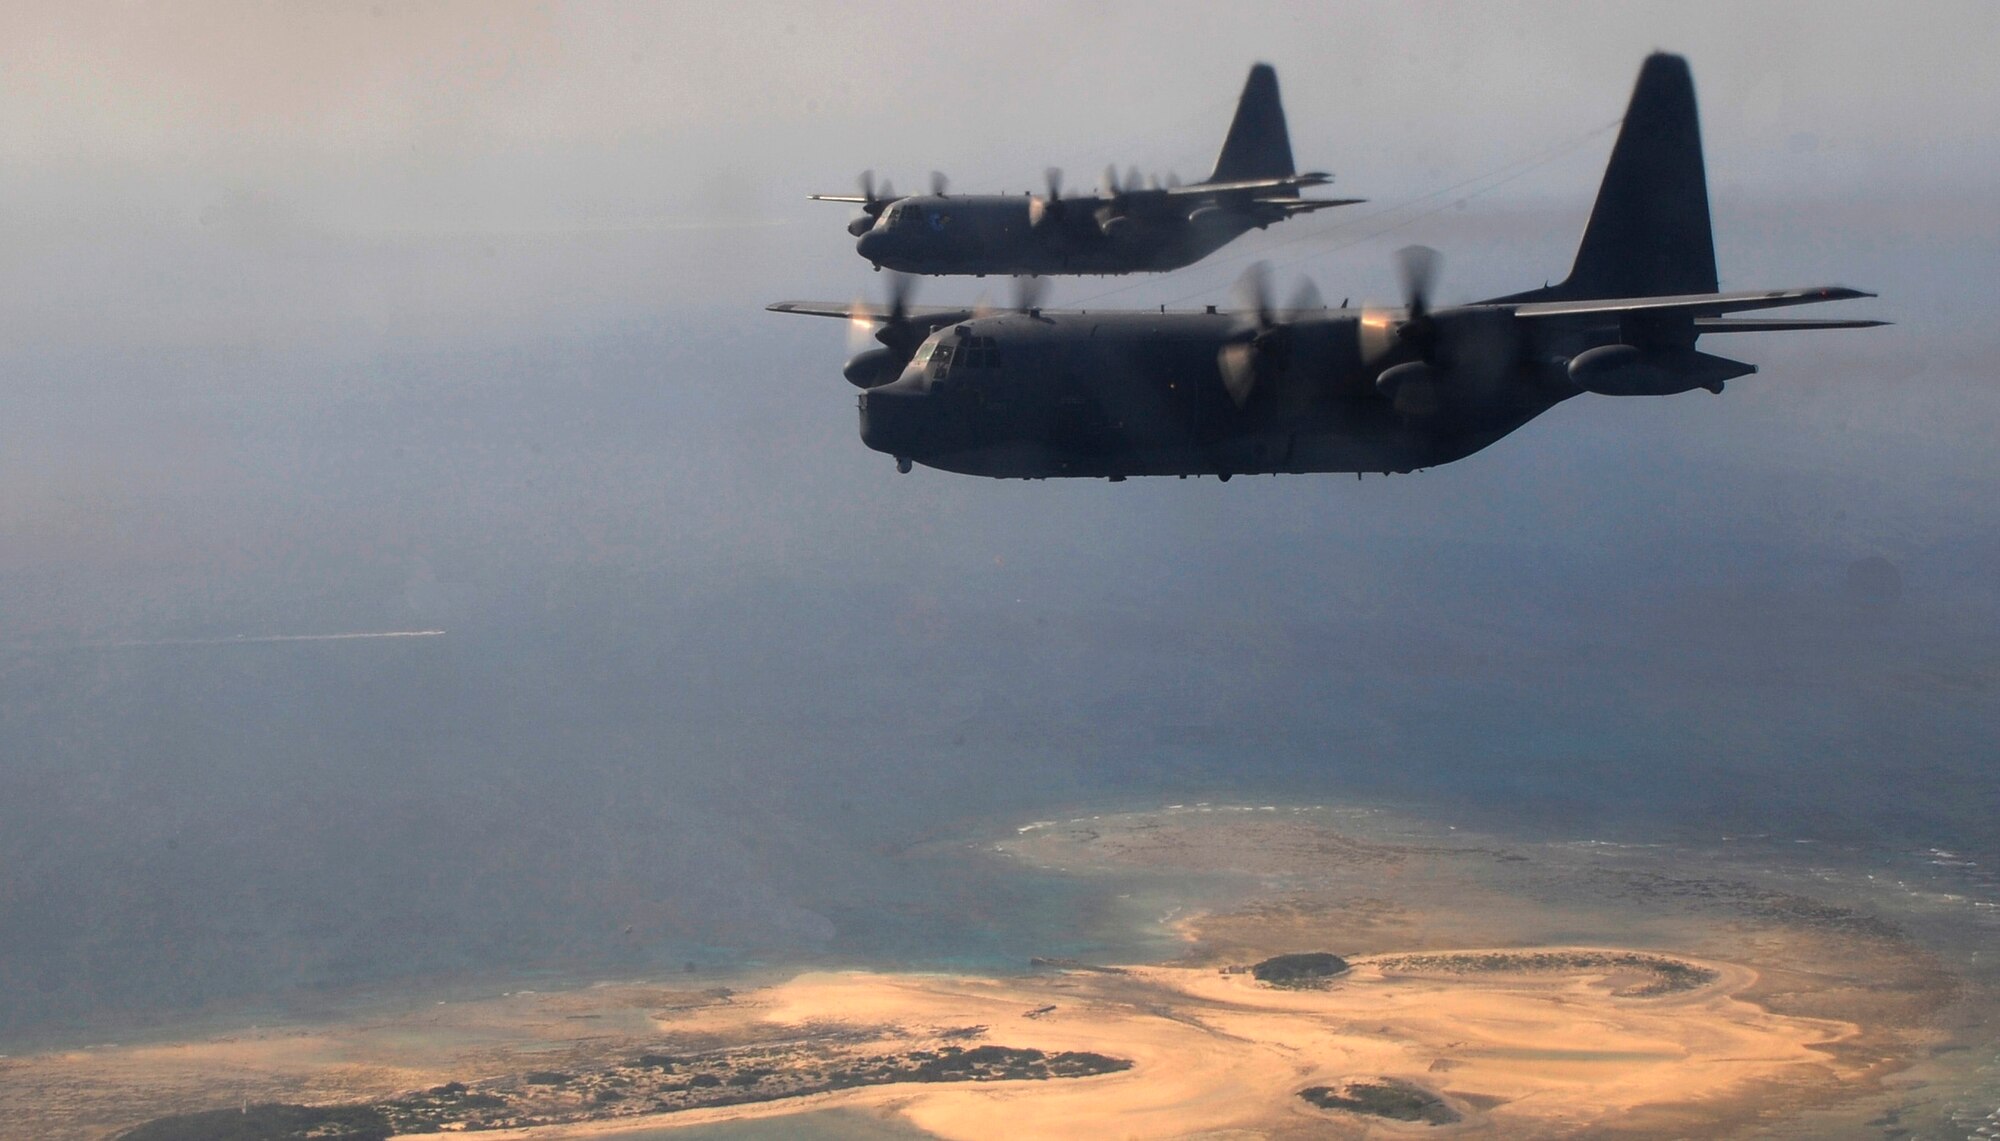 Two MC-130P Combat Shadows assigned to the 17th Special Operations Squadron fly off the coast of Okinawa, Japan, Oct. 16, 2014. The MC-130P conducts single or multi-ship infiltration, exfiltration and resupply of special operations forces.  (U.S. Air Force photo by Airman 1st Class Keith James)